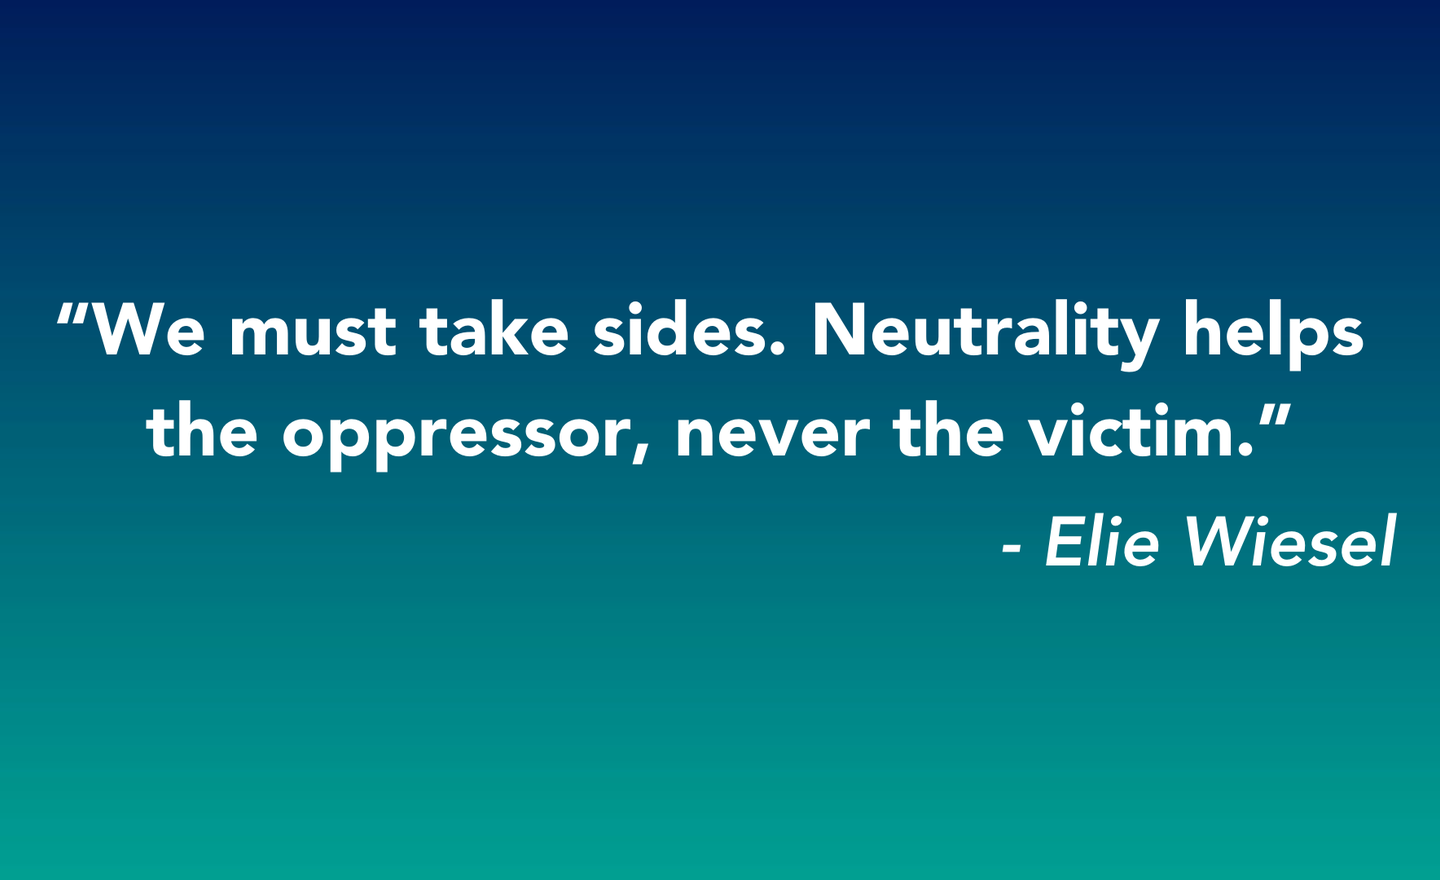 wiesel quote.png 1440x880 q85 crop subsampling 2 upscale